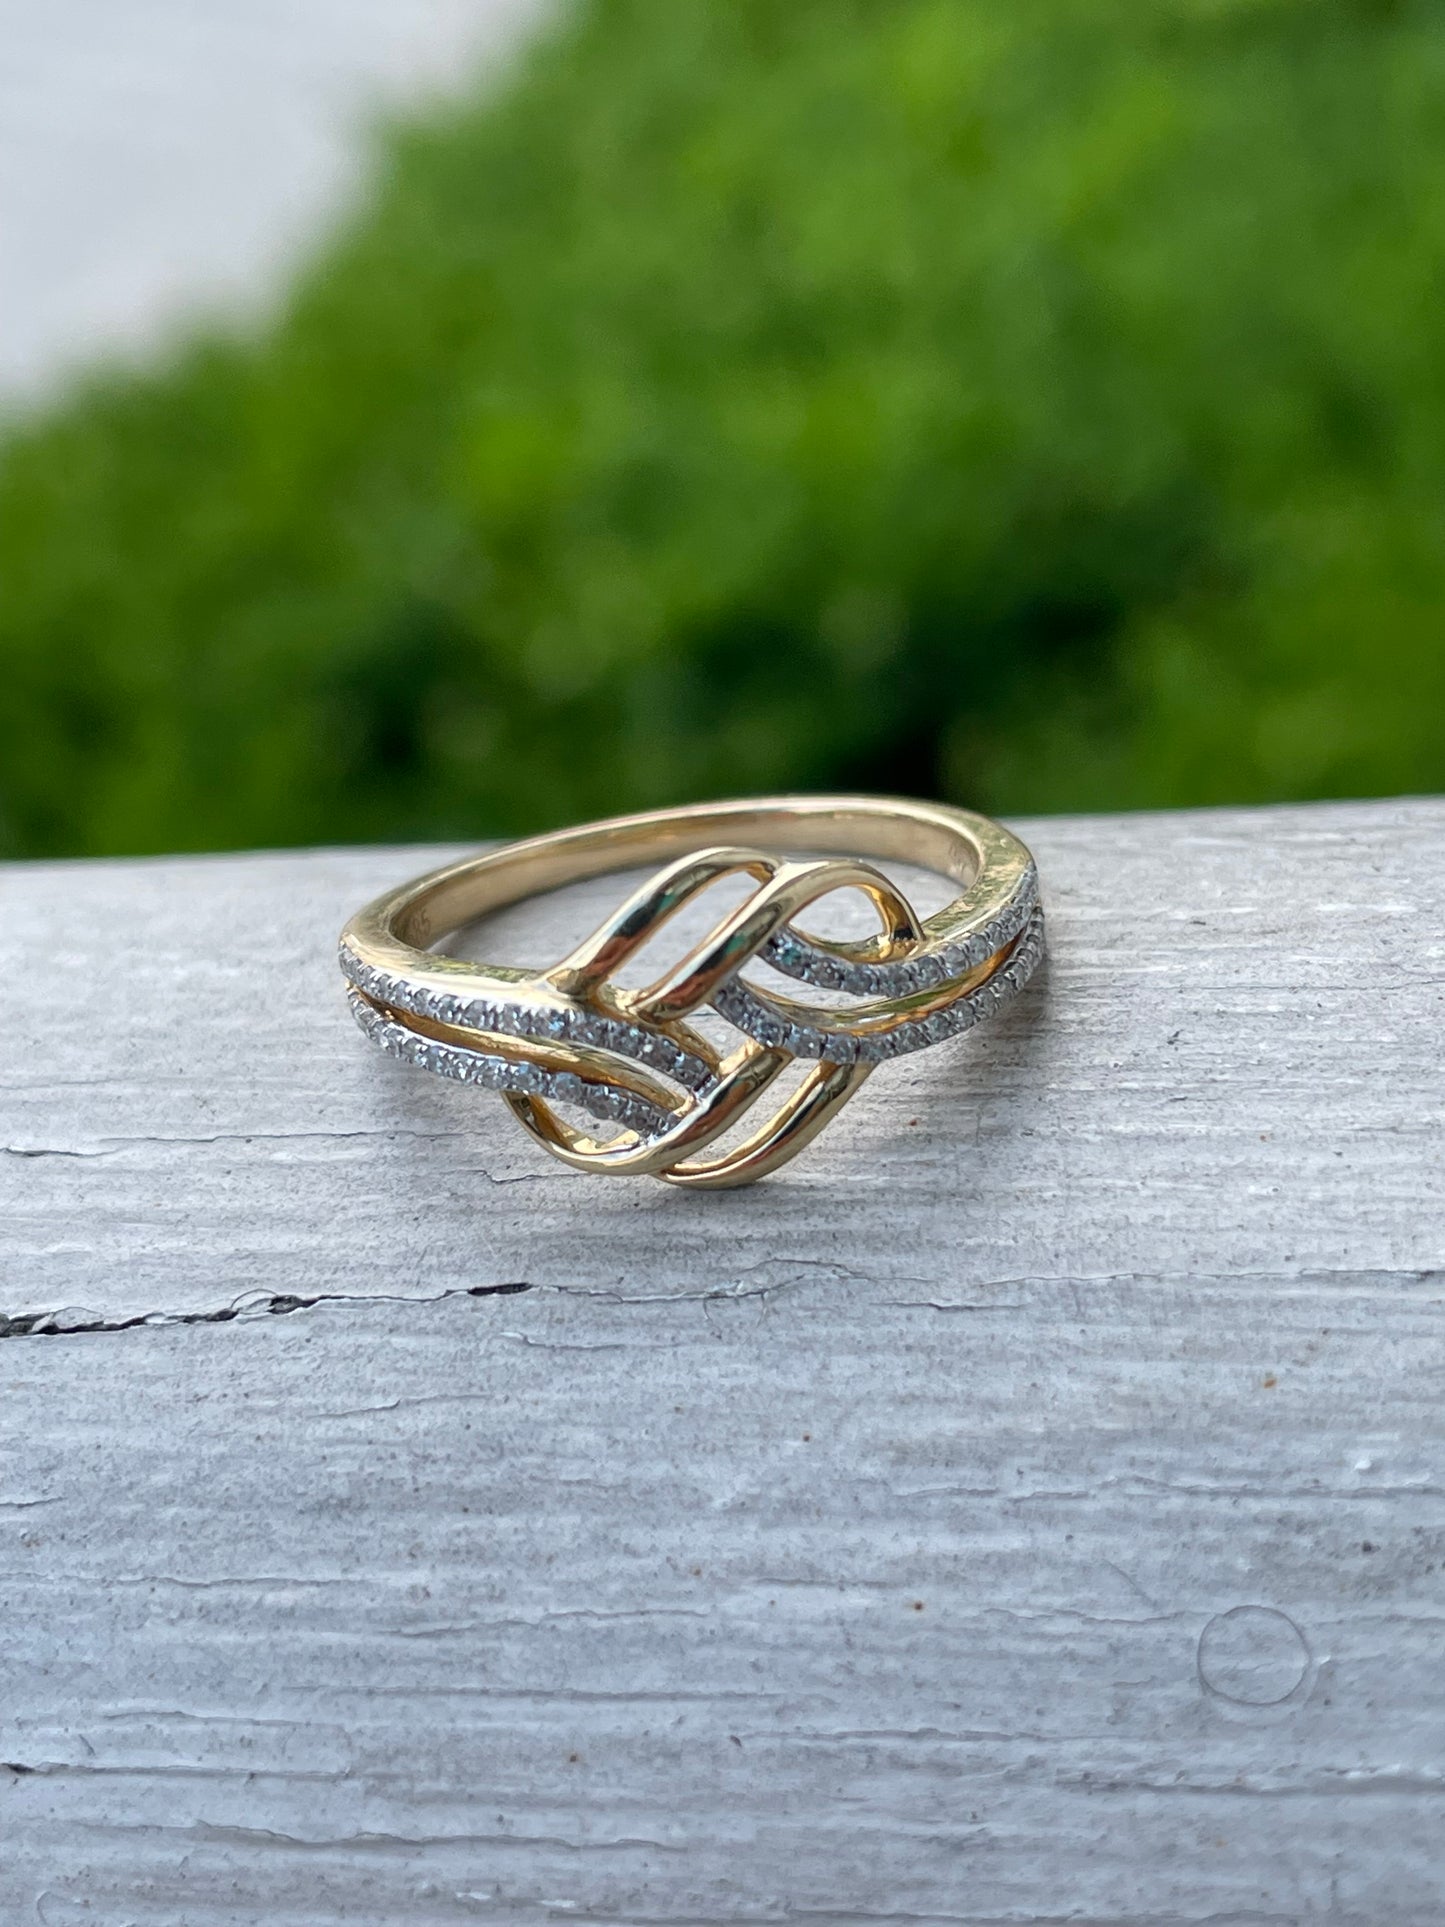 14K Gold "Crossing Paths" diamond band ring size 7